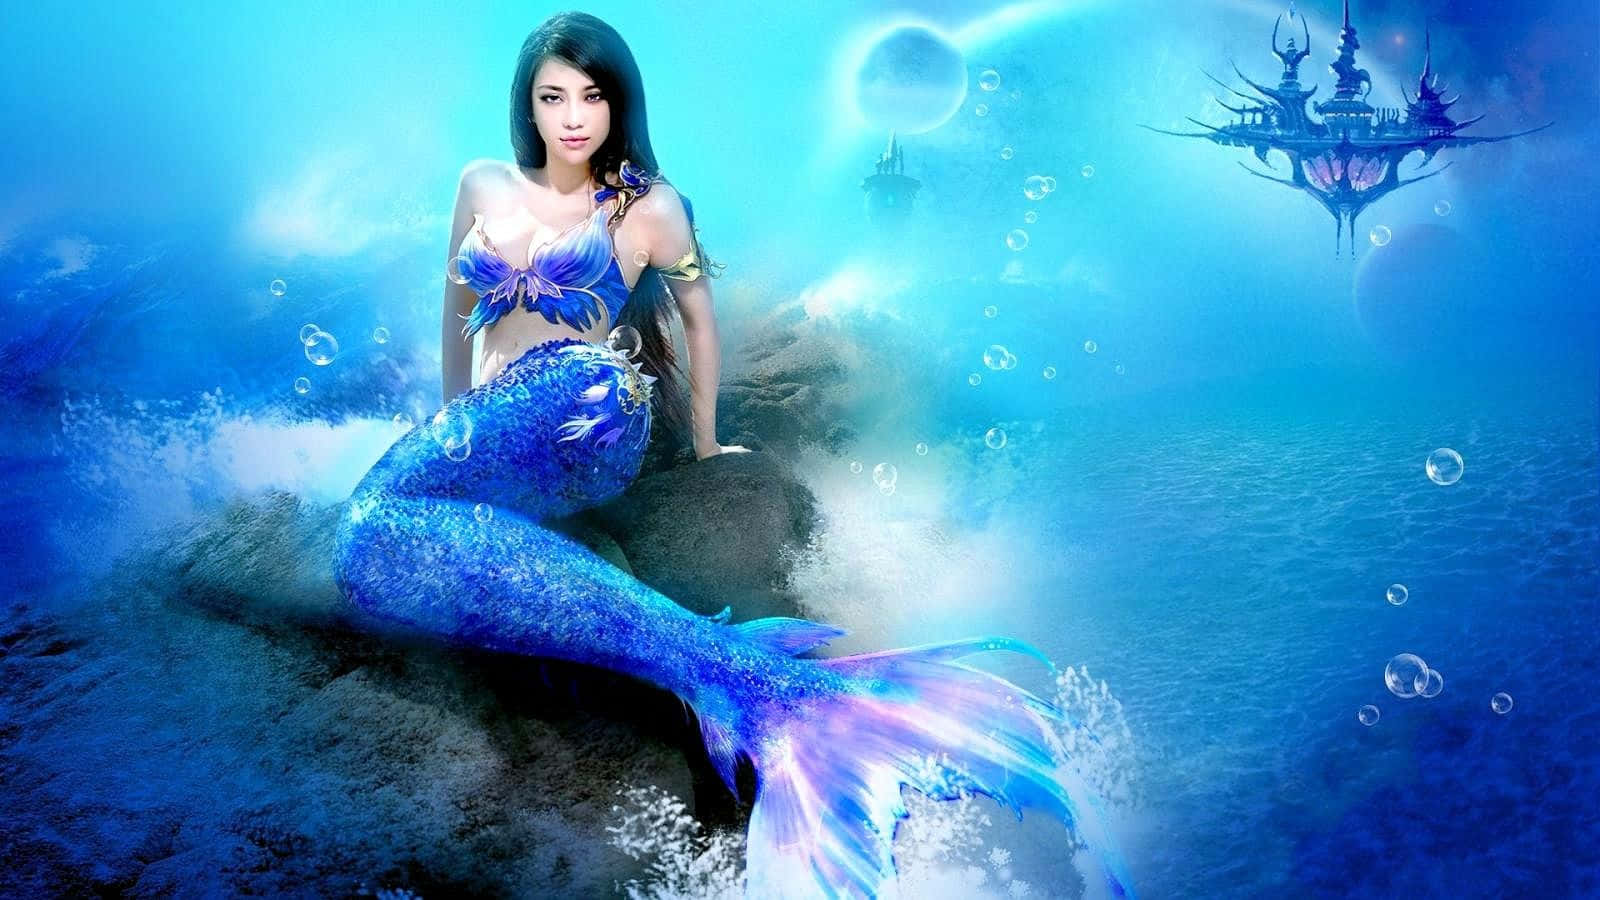 Mermaid With Blue Tail And A Mermaid Castle Wallpaper